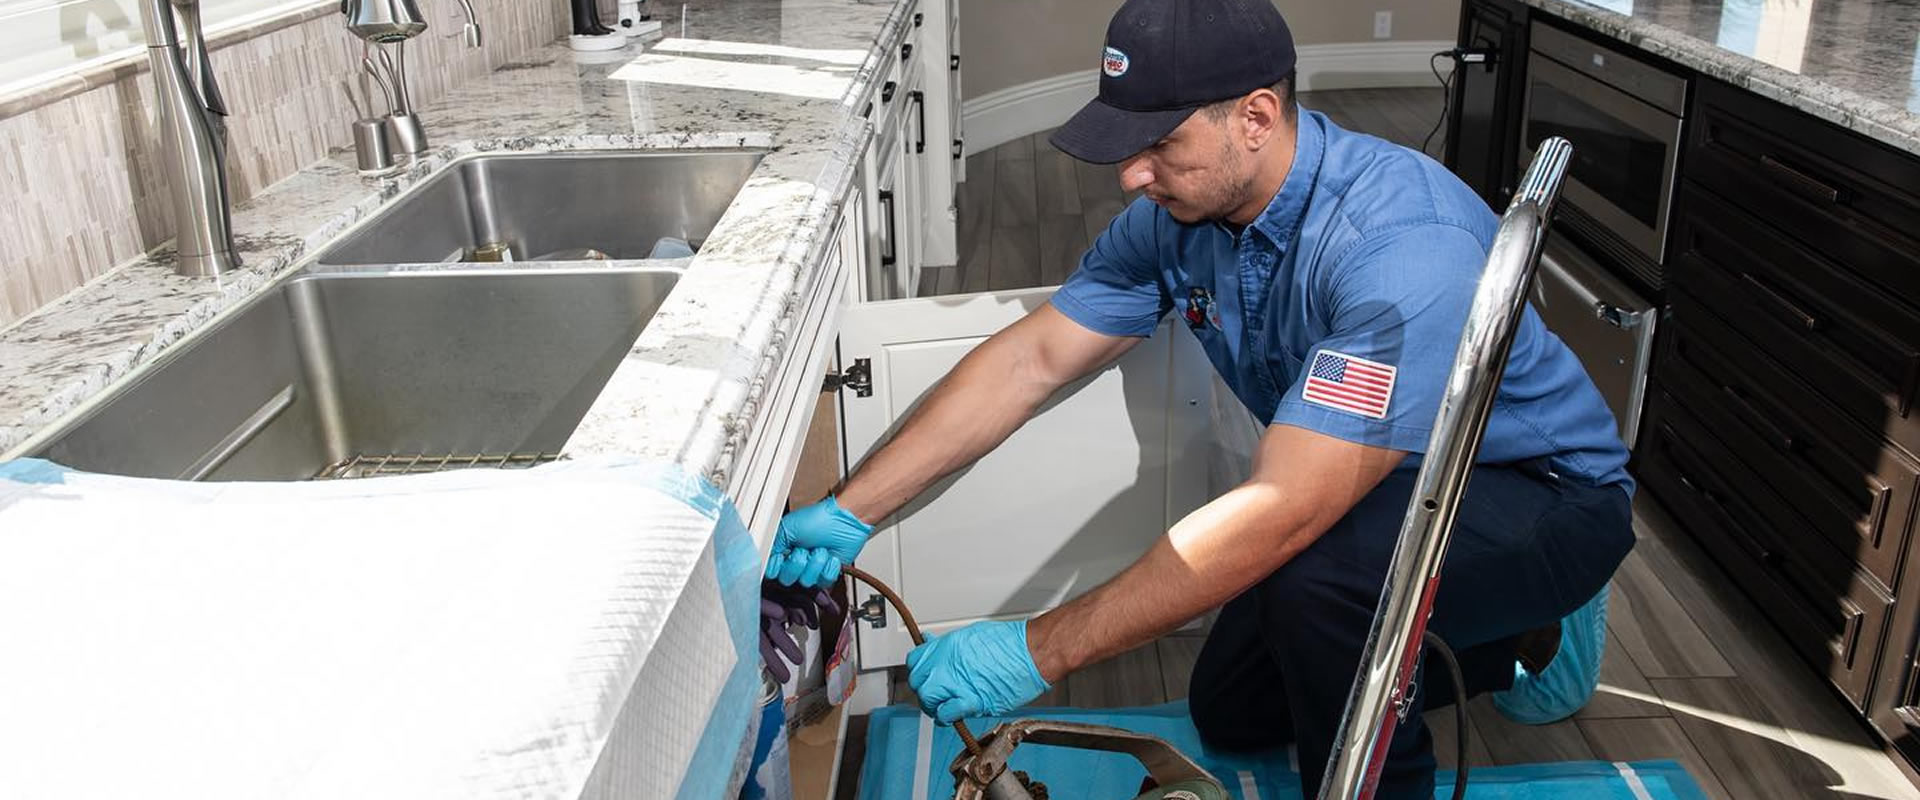 Five Things to Consider When Looking for a Good Plumber